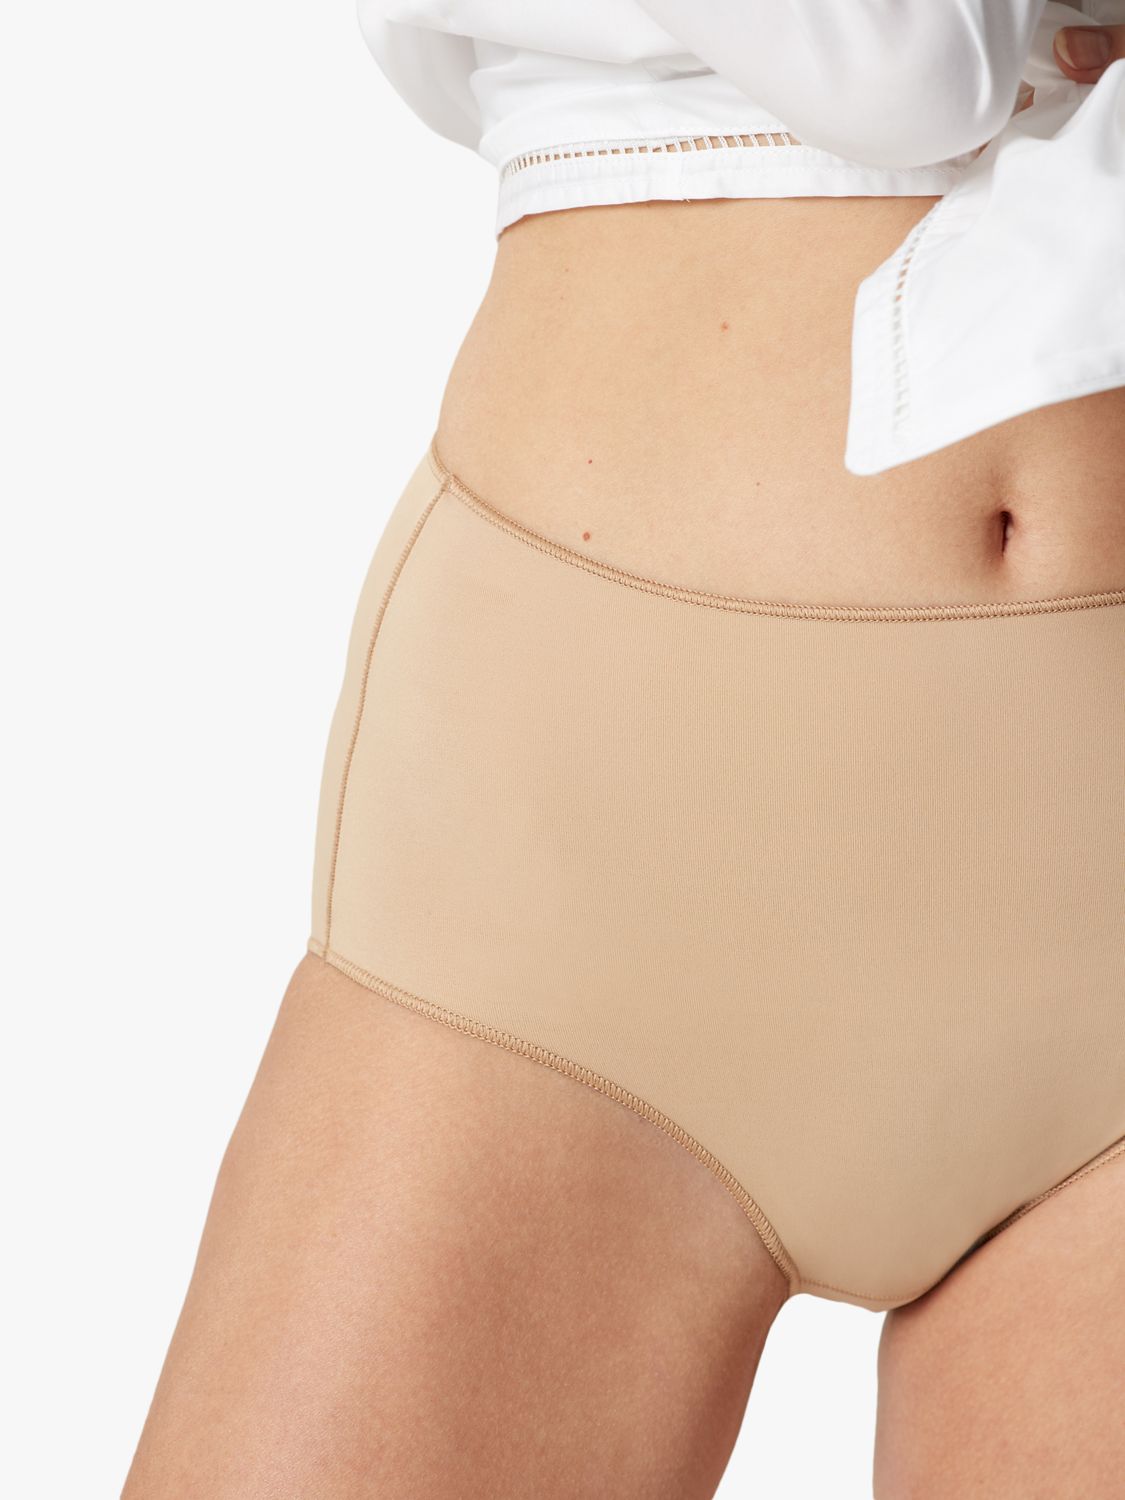 Maison Lejaby Les Invisibles Full Briefs, Power Skin at John Lewis &  Partners